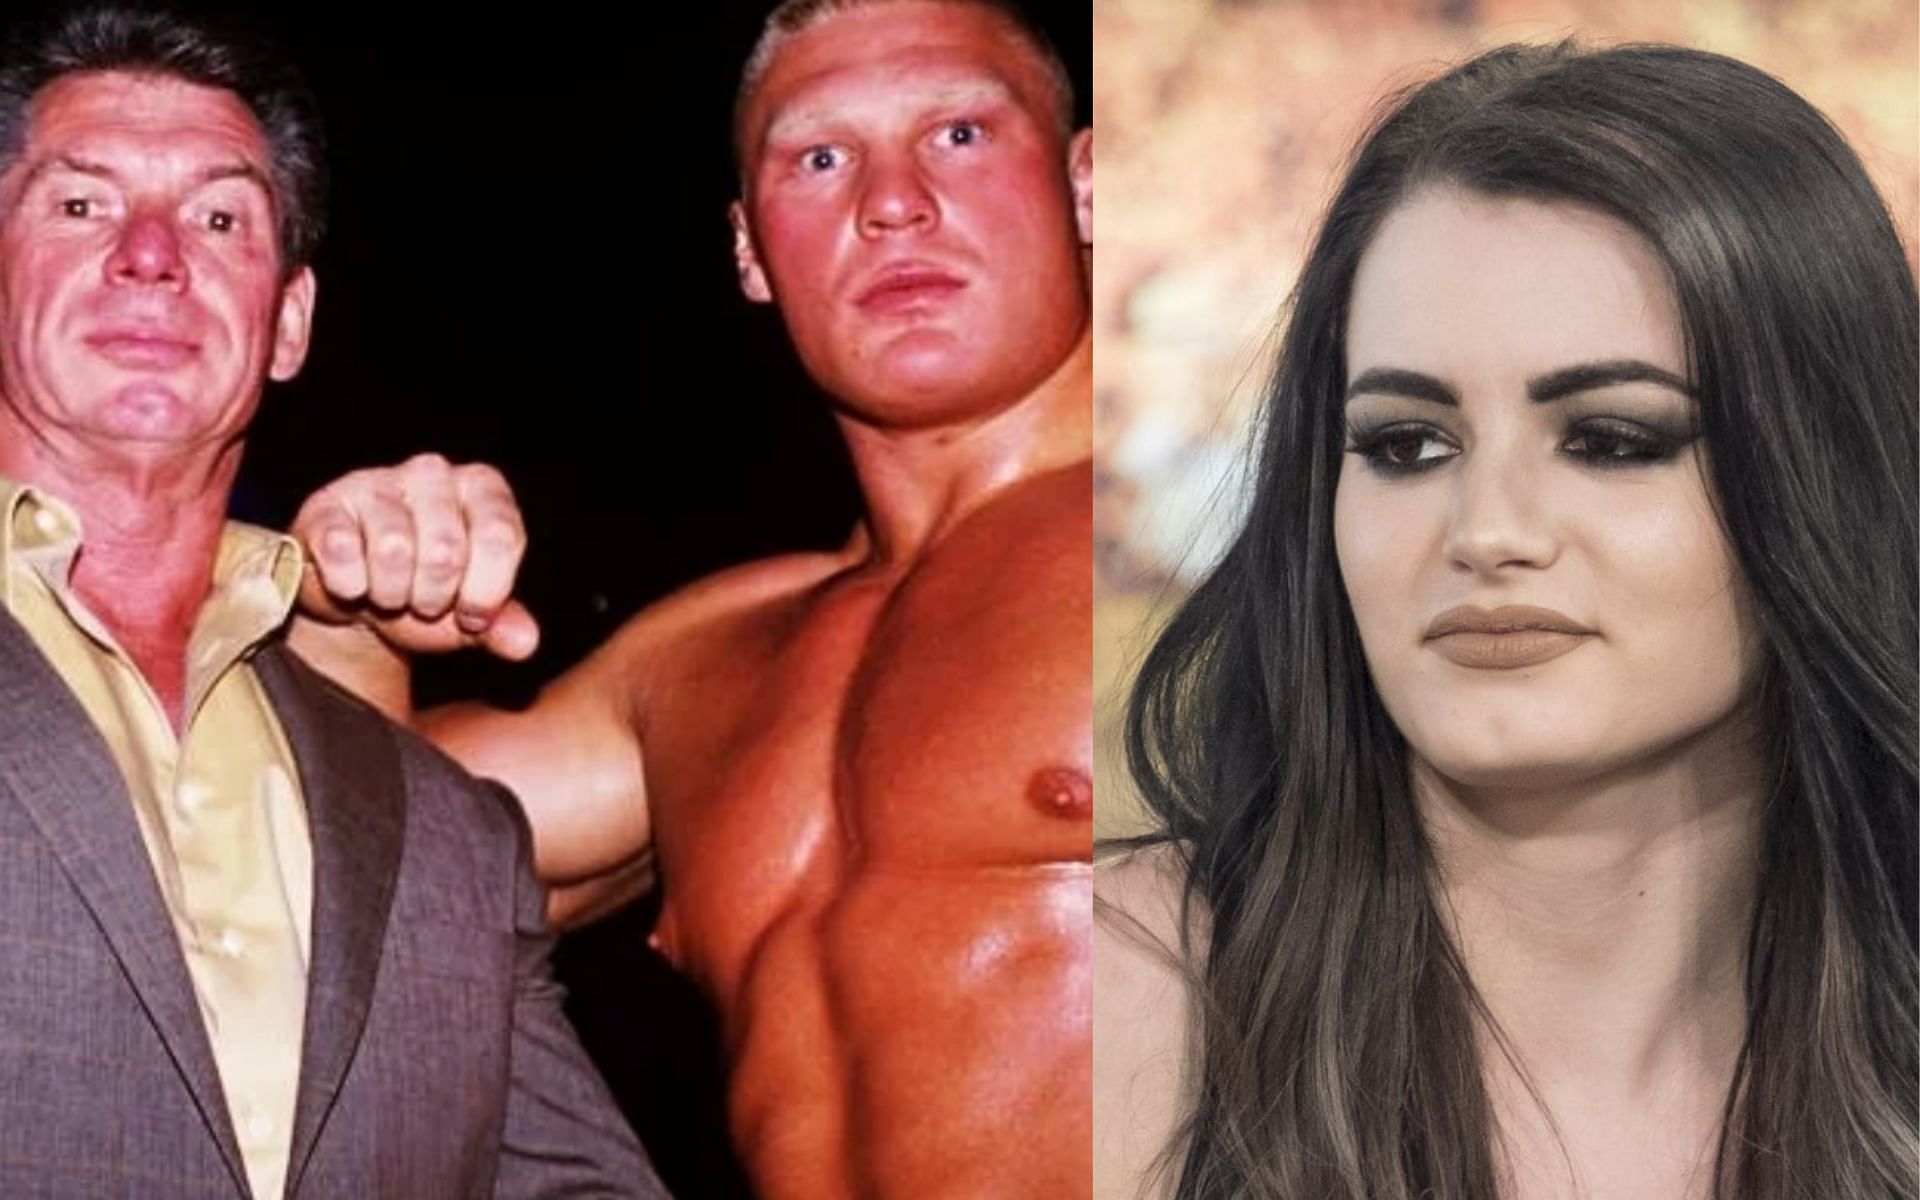 WWEs special treatment of Brock Lesnar pointed out by Paige